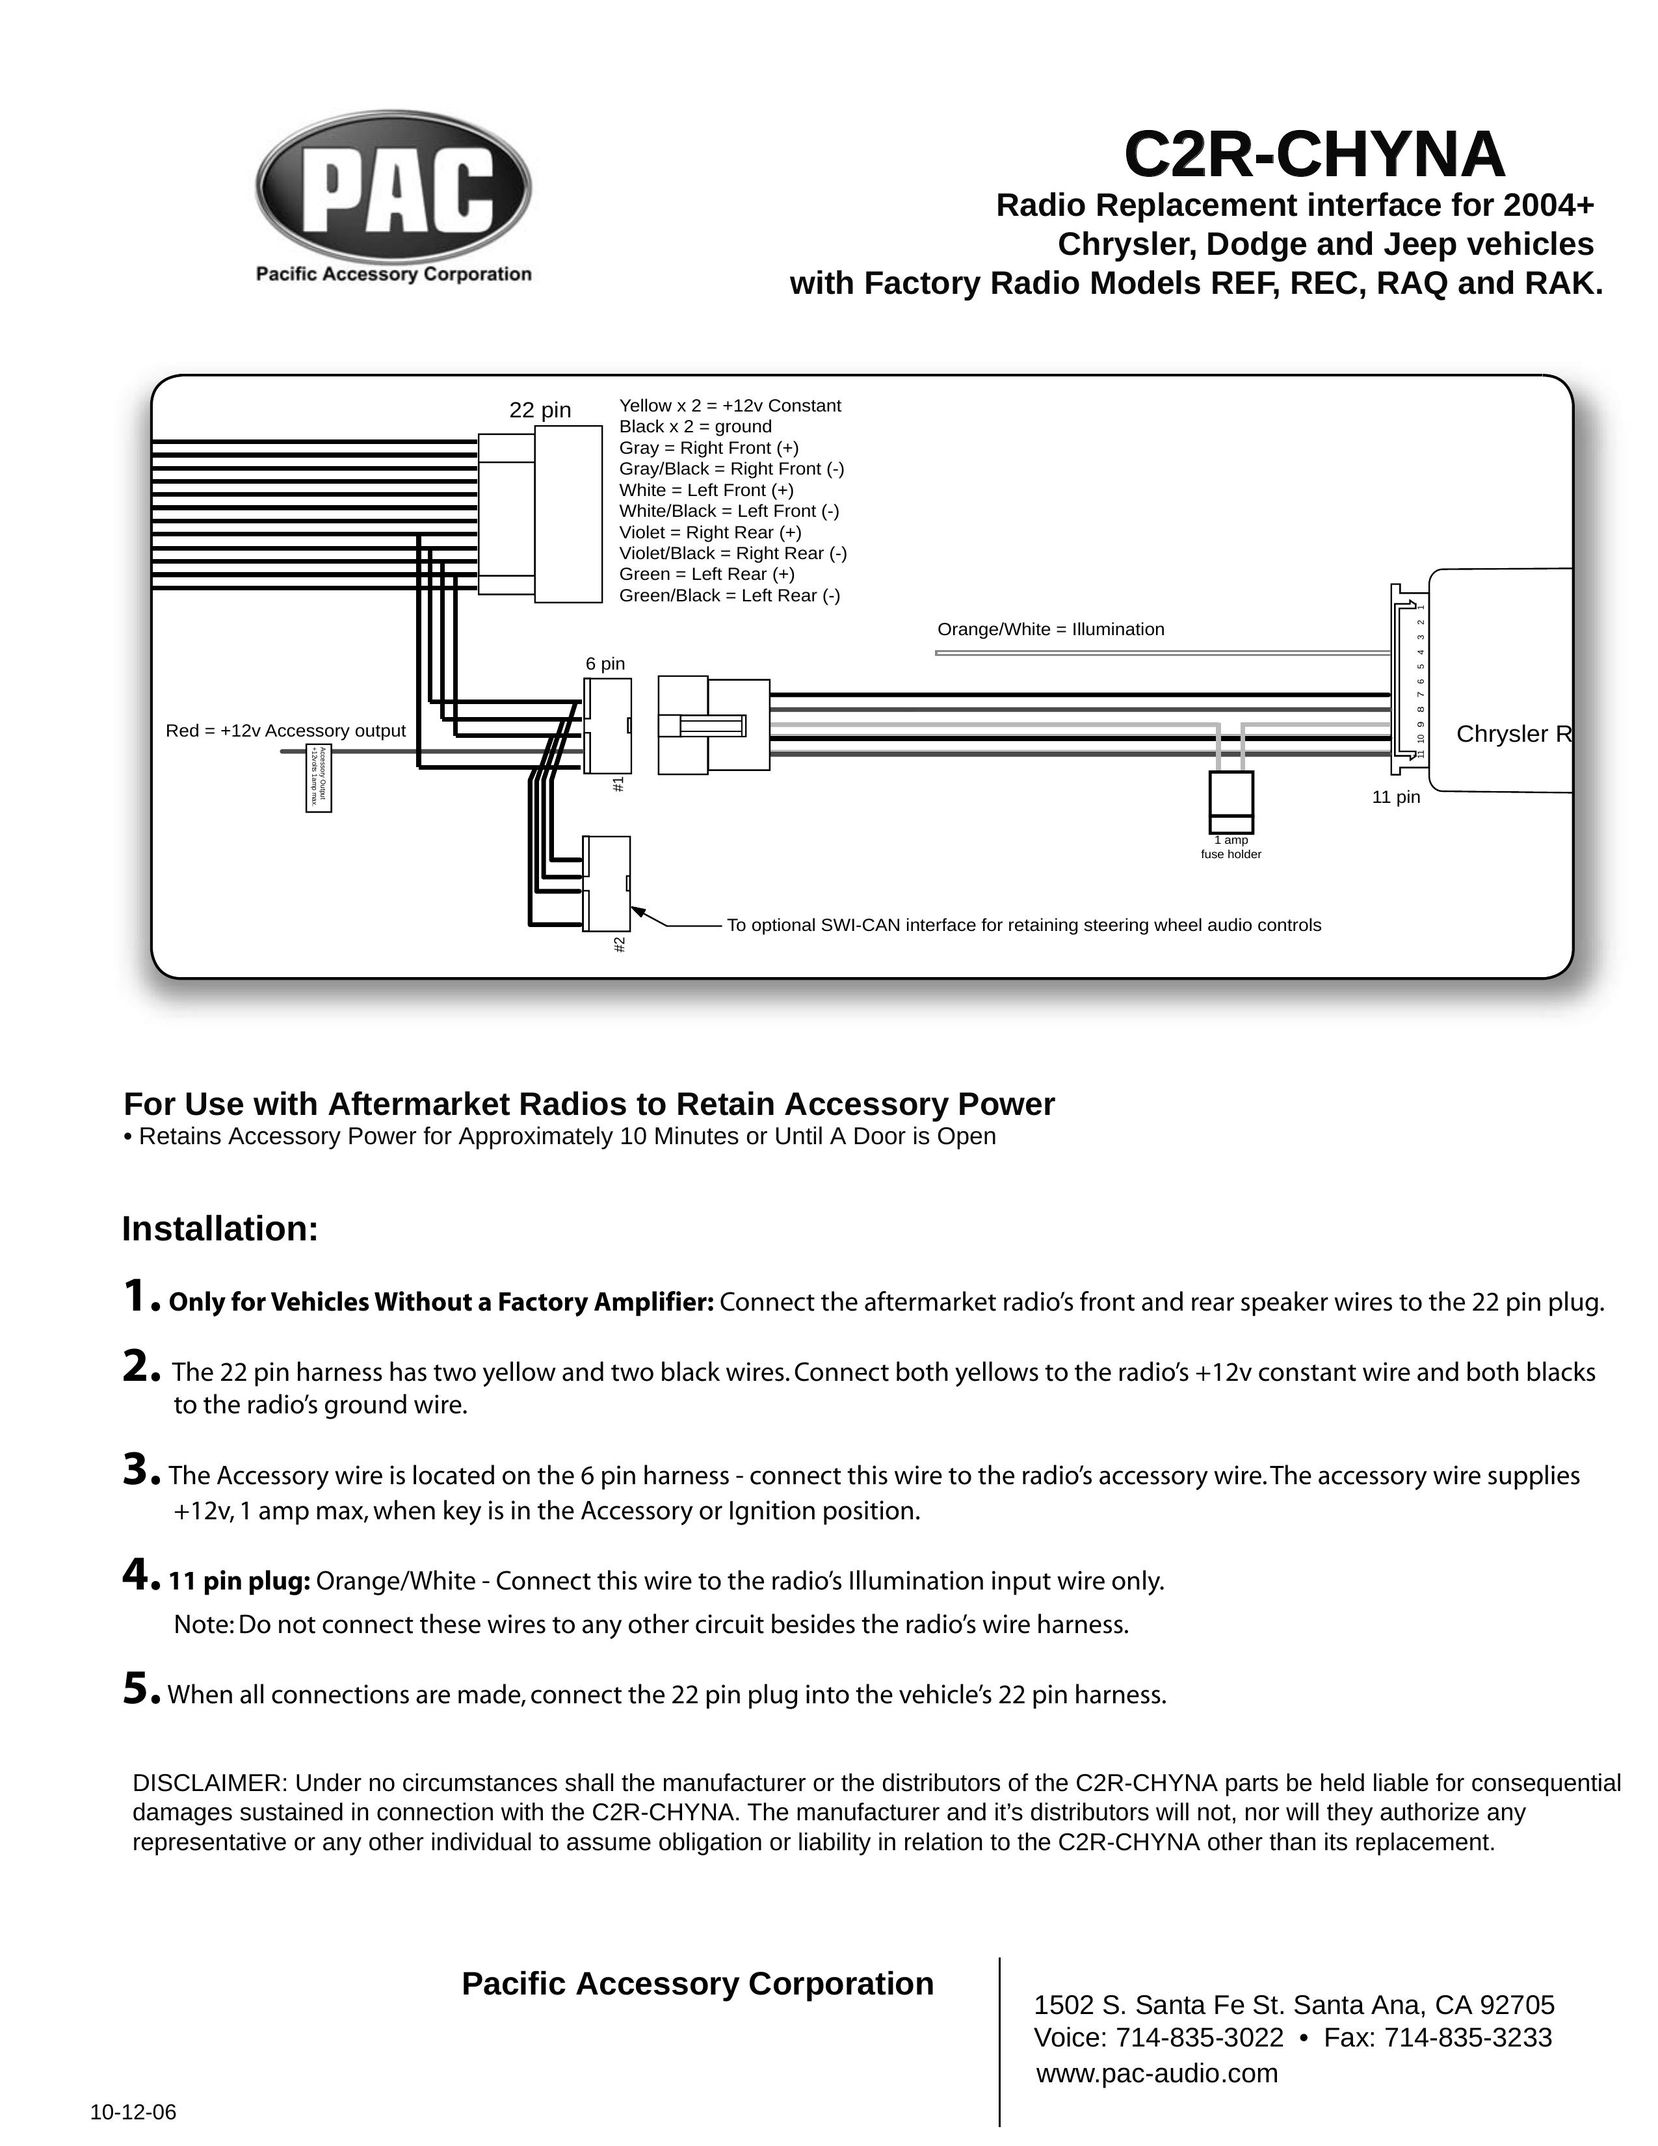 PAC C2R-CHYNA Car Stereo System User Manual